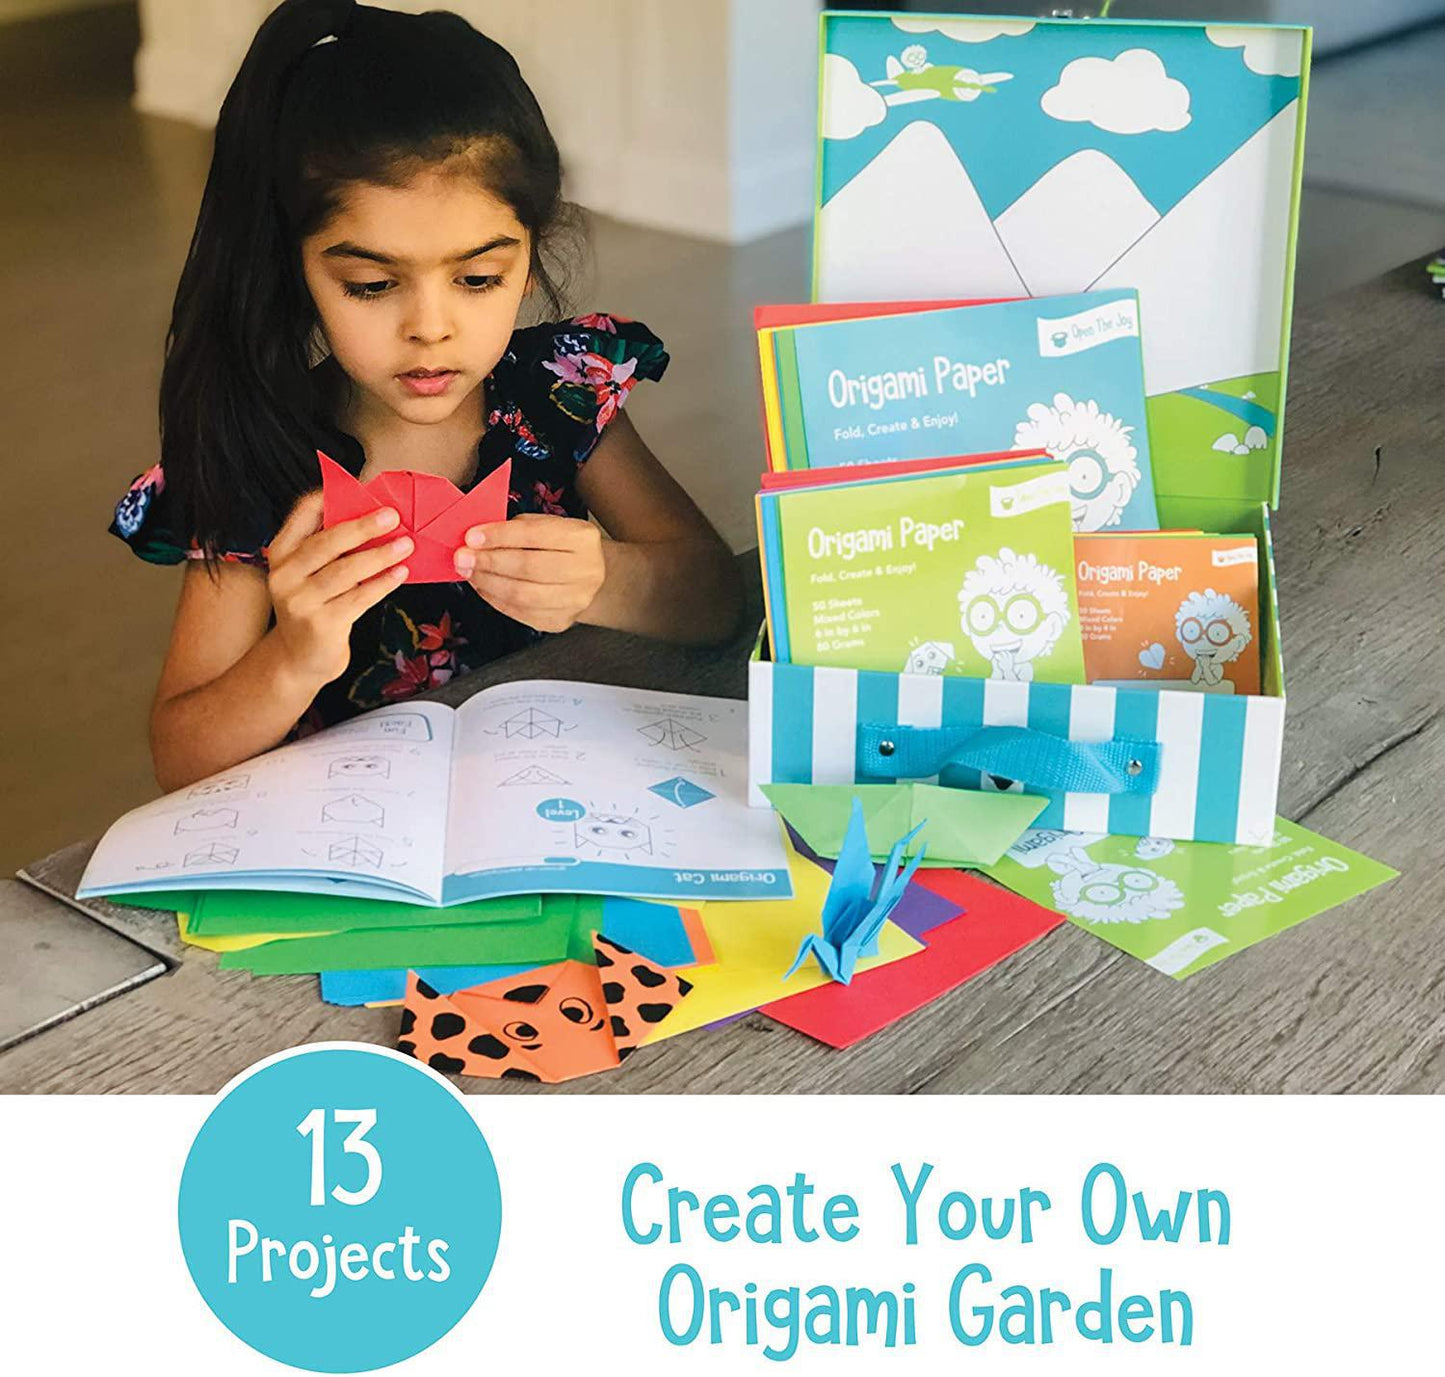 Origami Gift Kit Box | 150 Sheets of Origami Paper & 32 Page Book for Beginners | Premium Multicolor Kids Origami Kit |Origami Paper Pack Activity Kit